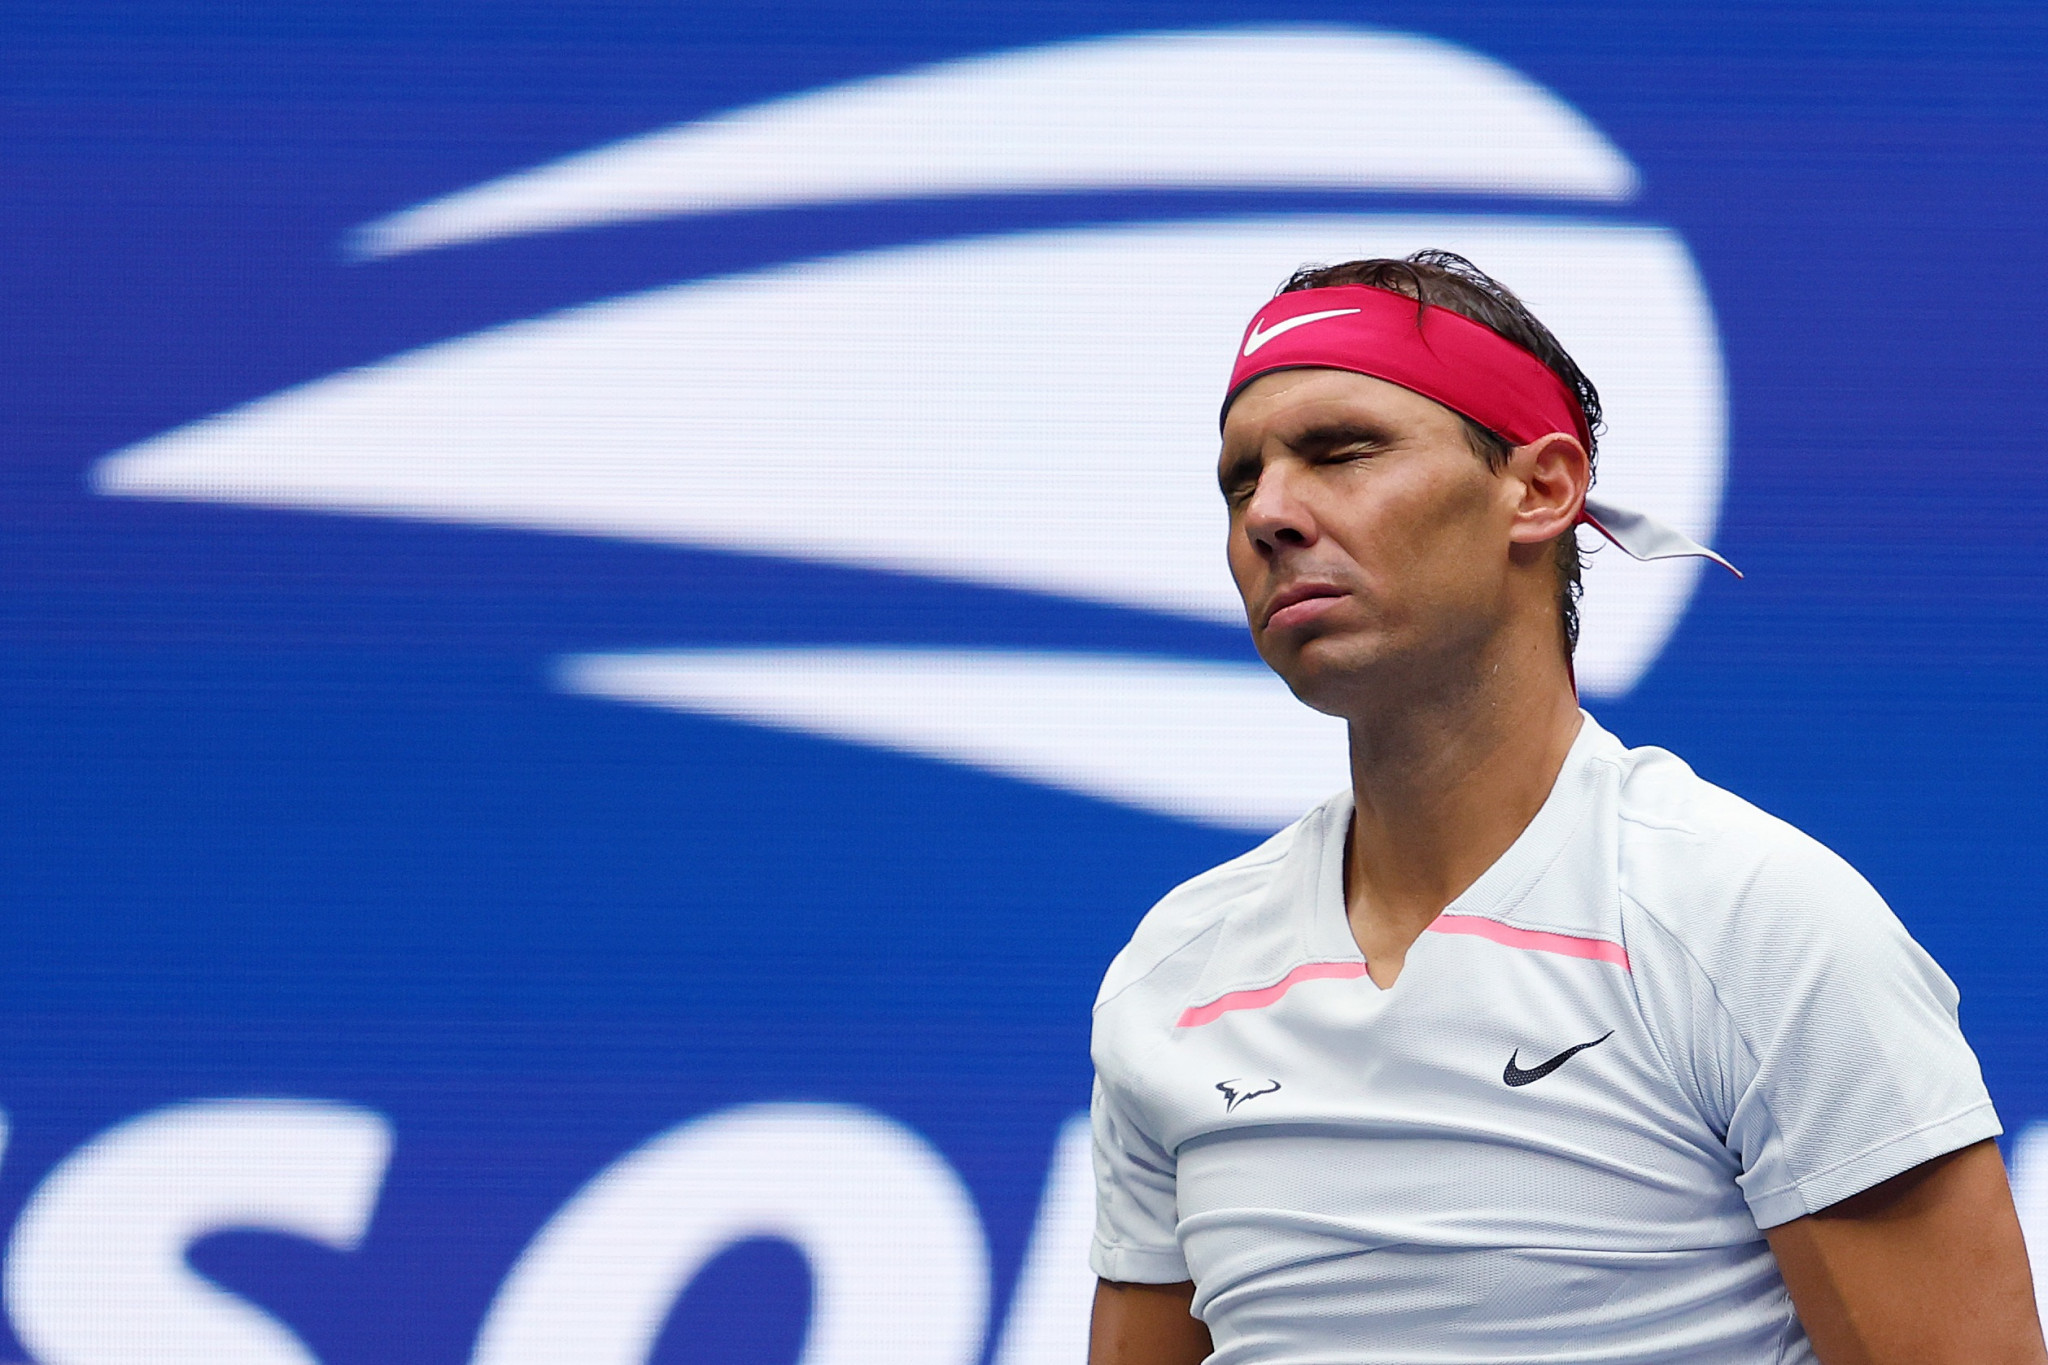 Nadal unsure on return date after shock US Open loss to Tiafoe